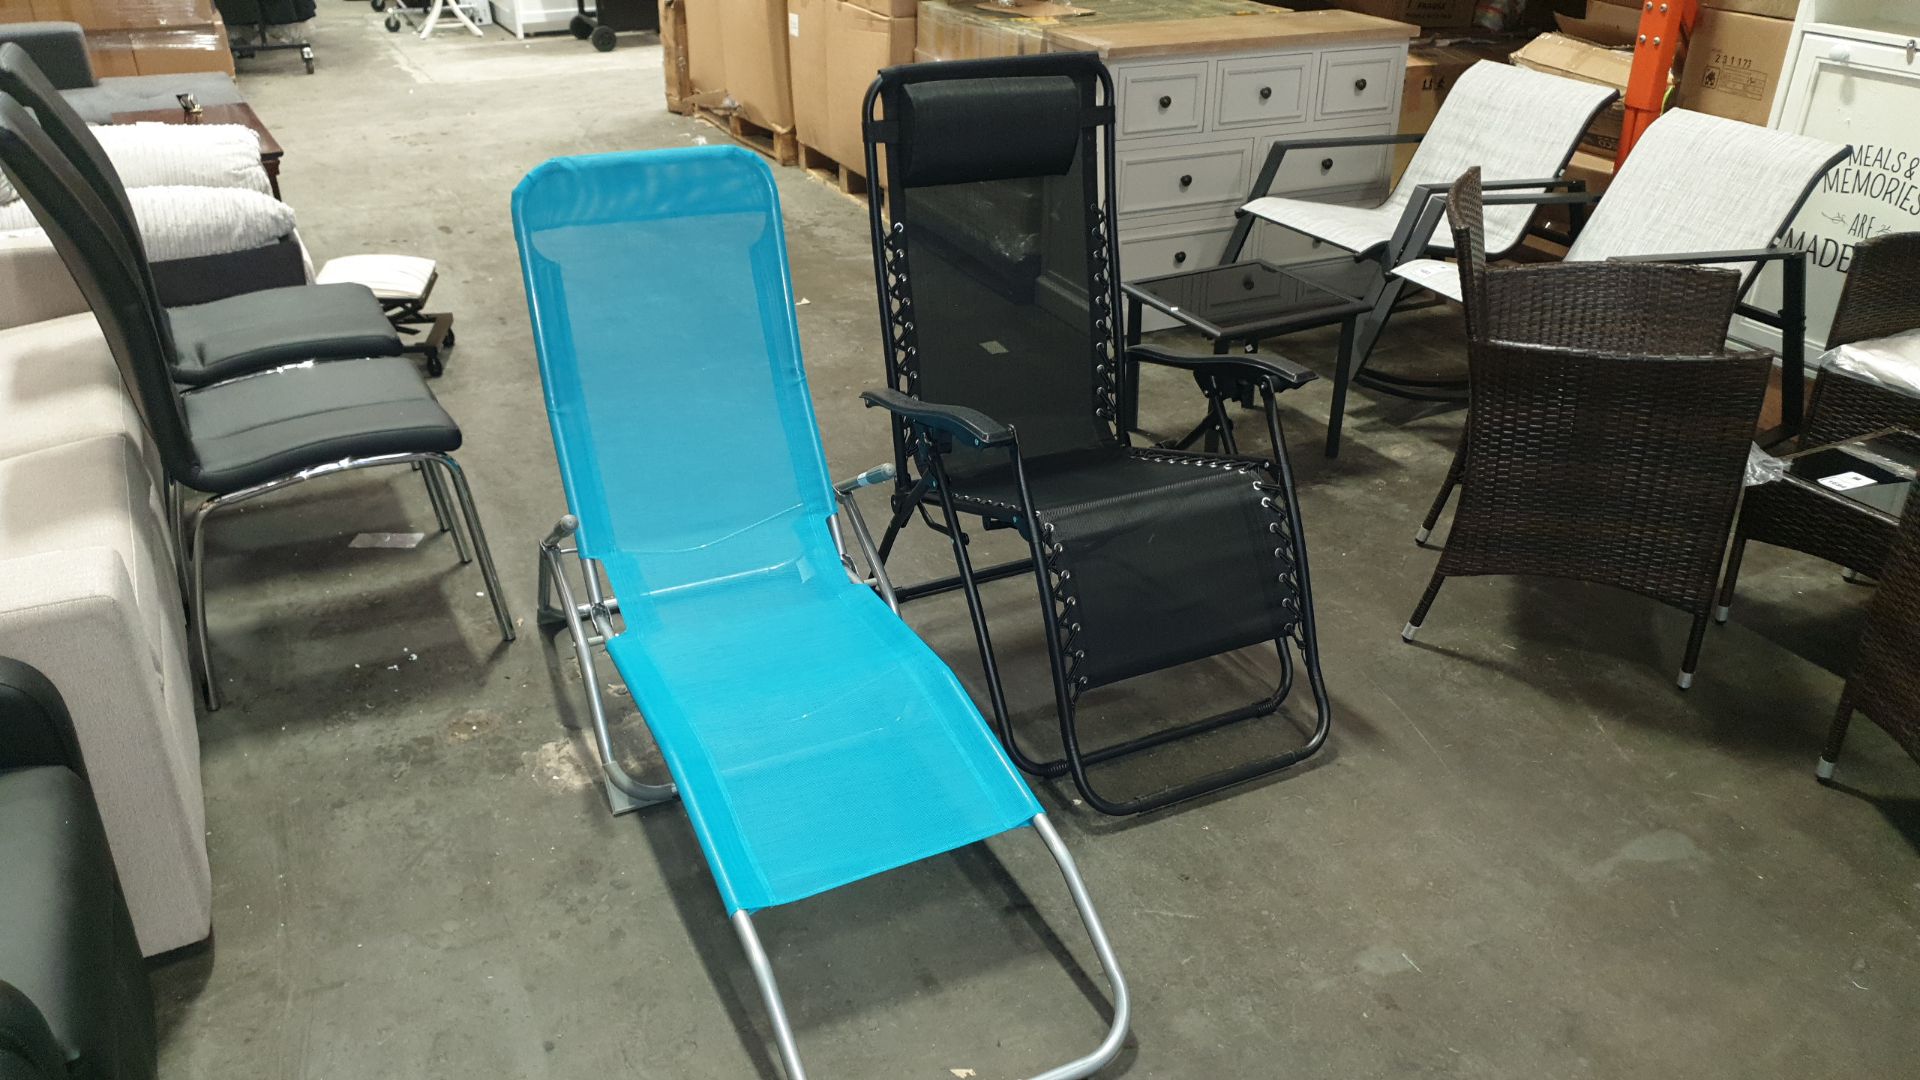 4 X GARDEN LOUNGERS - 3 TURQUOISE, 1 BLACK